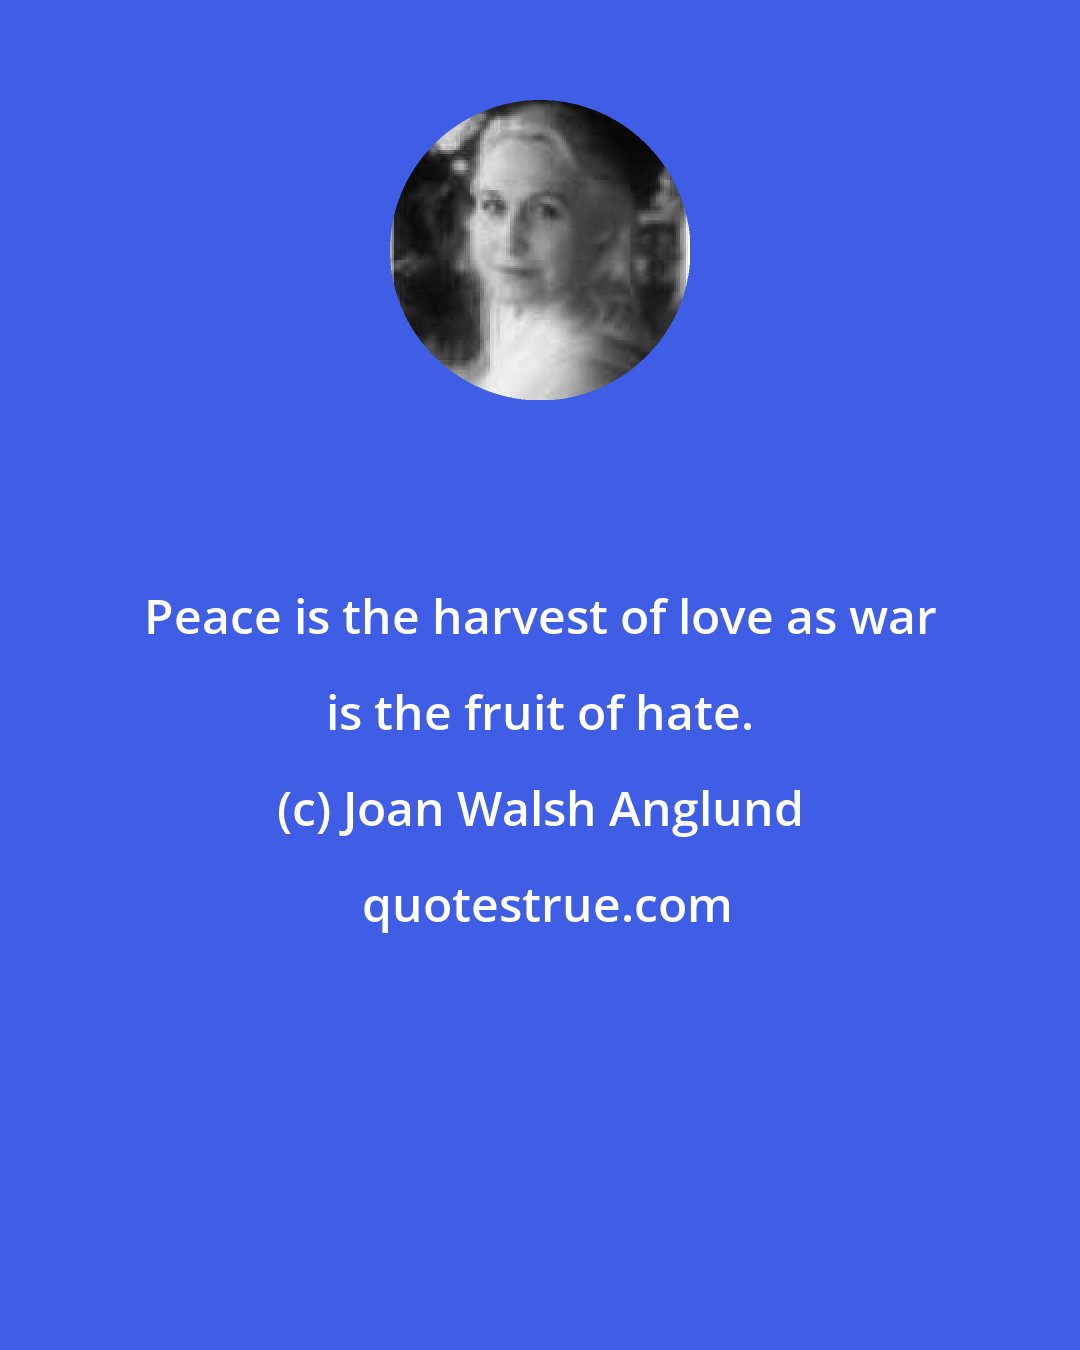 Joan Walsh Anglund: Peace is the harvest of love as war is the fruit of hate.